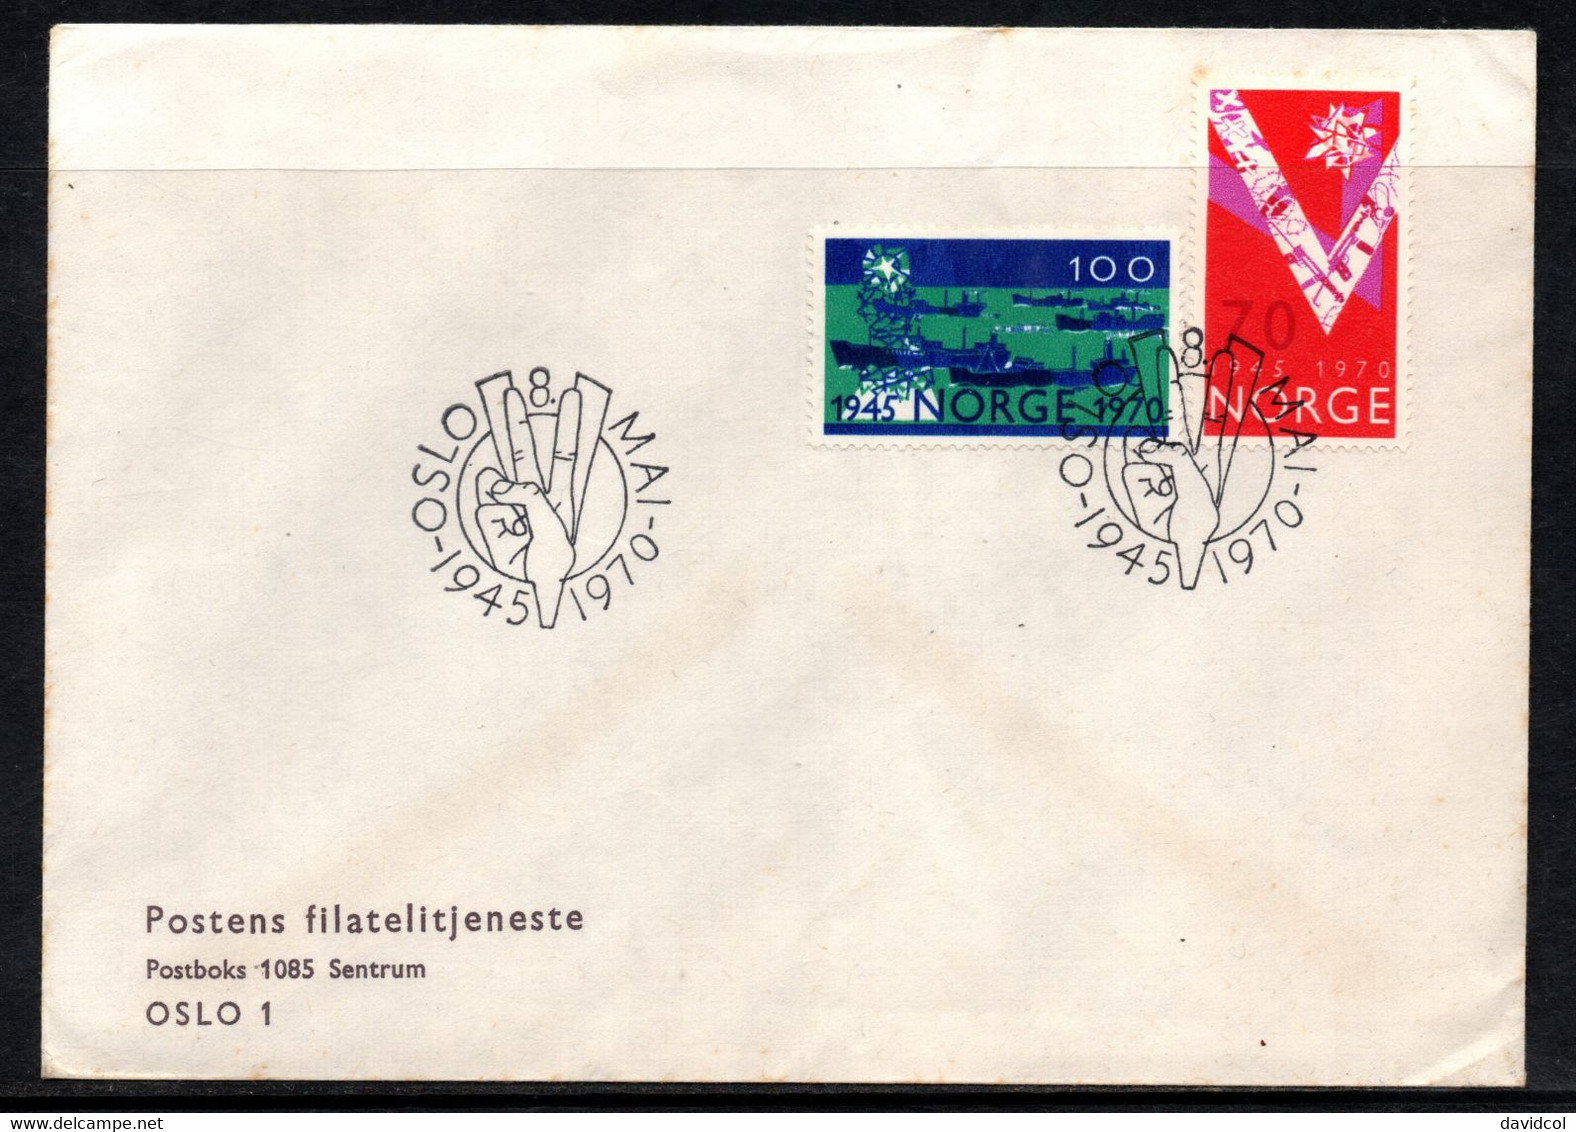 CA190- COVERAUCTION!!! - NORWAY 1970 - OSLO 8-5-70- NORWAY LIBERATION FROM THE GERMANS, 25TH ANNIVERSARY - Covers & Documents